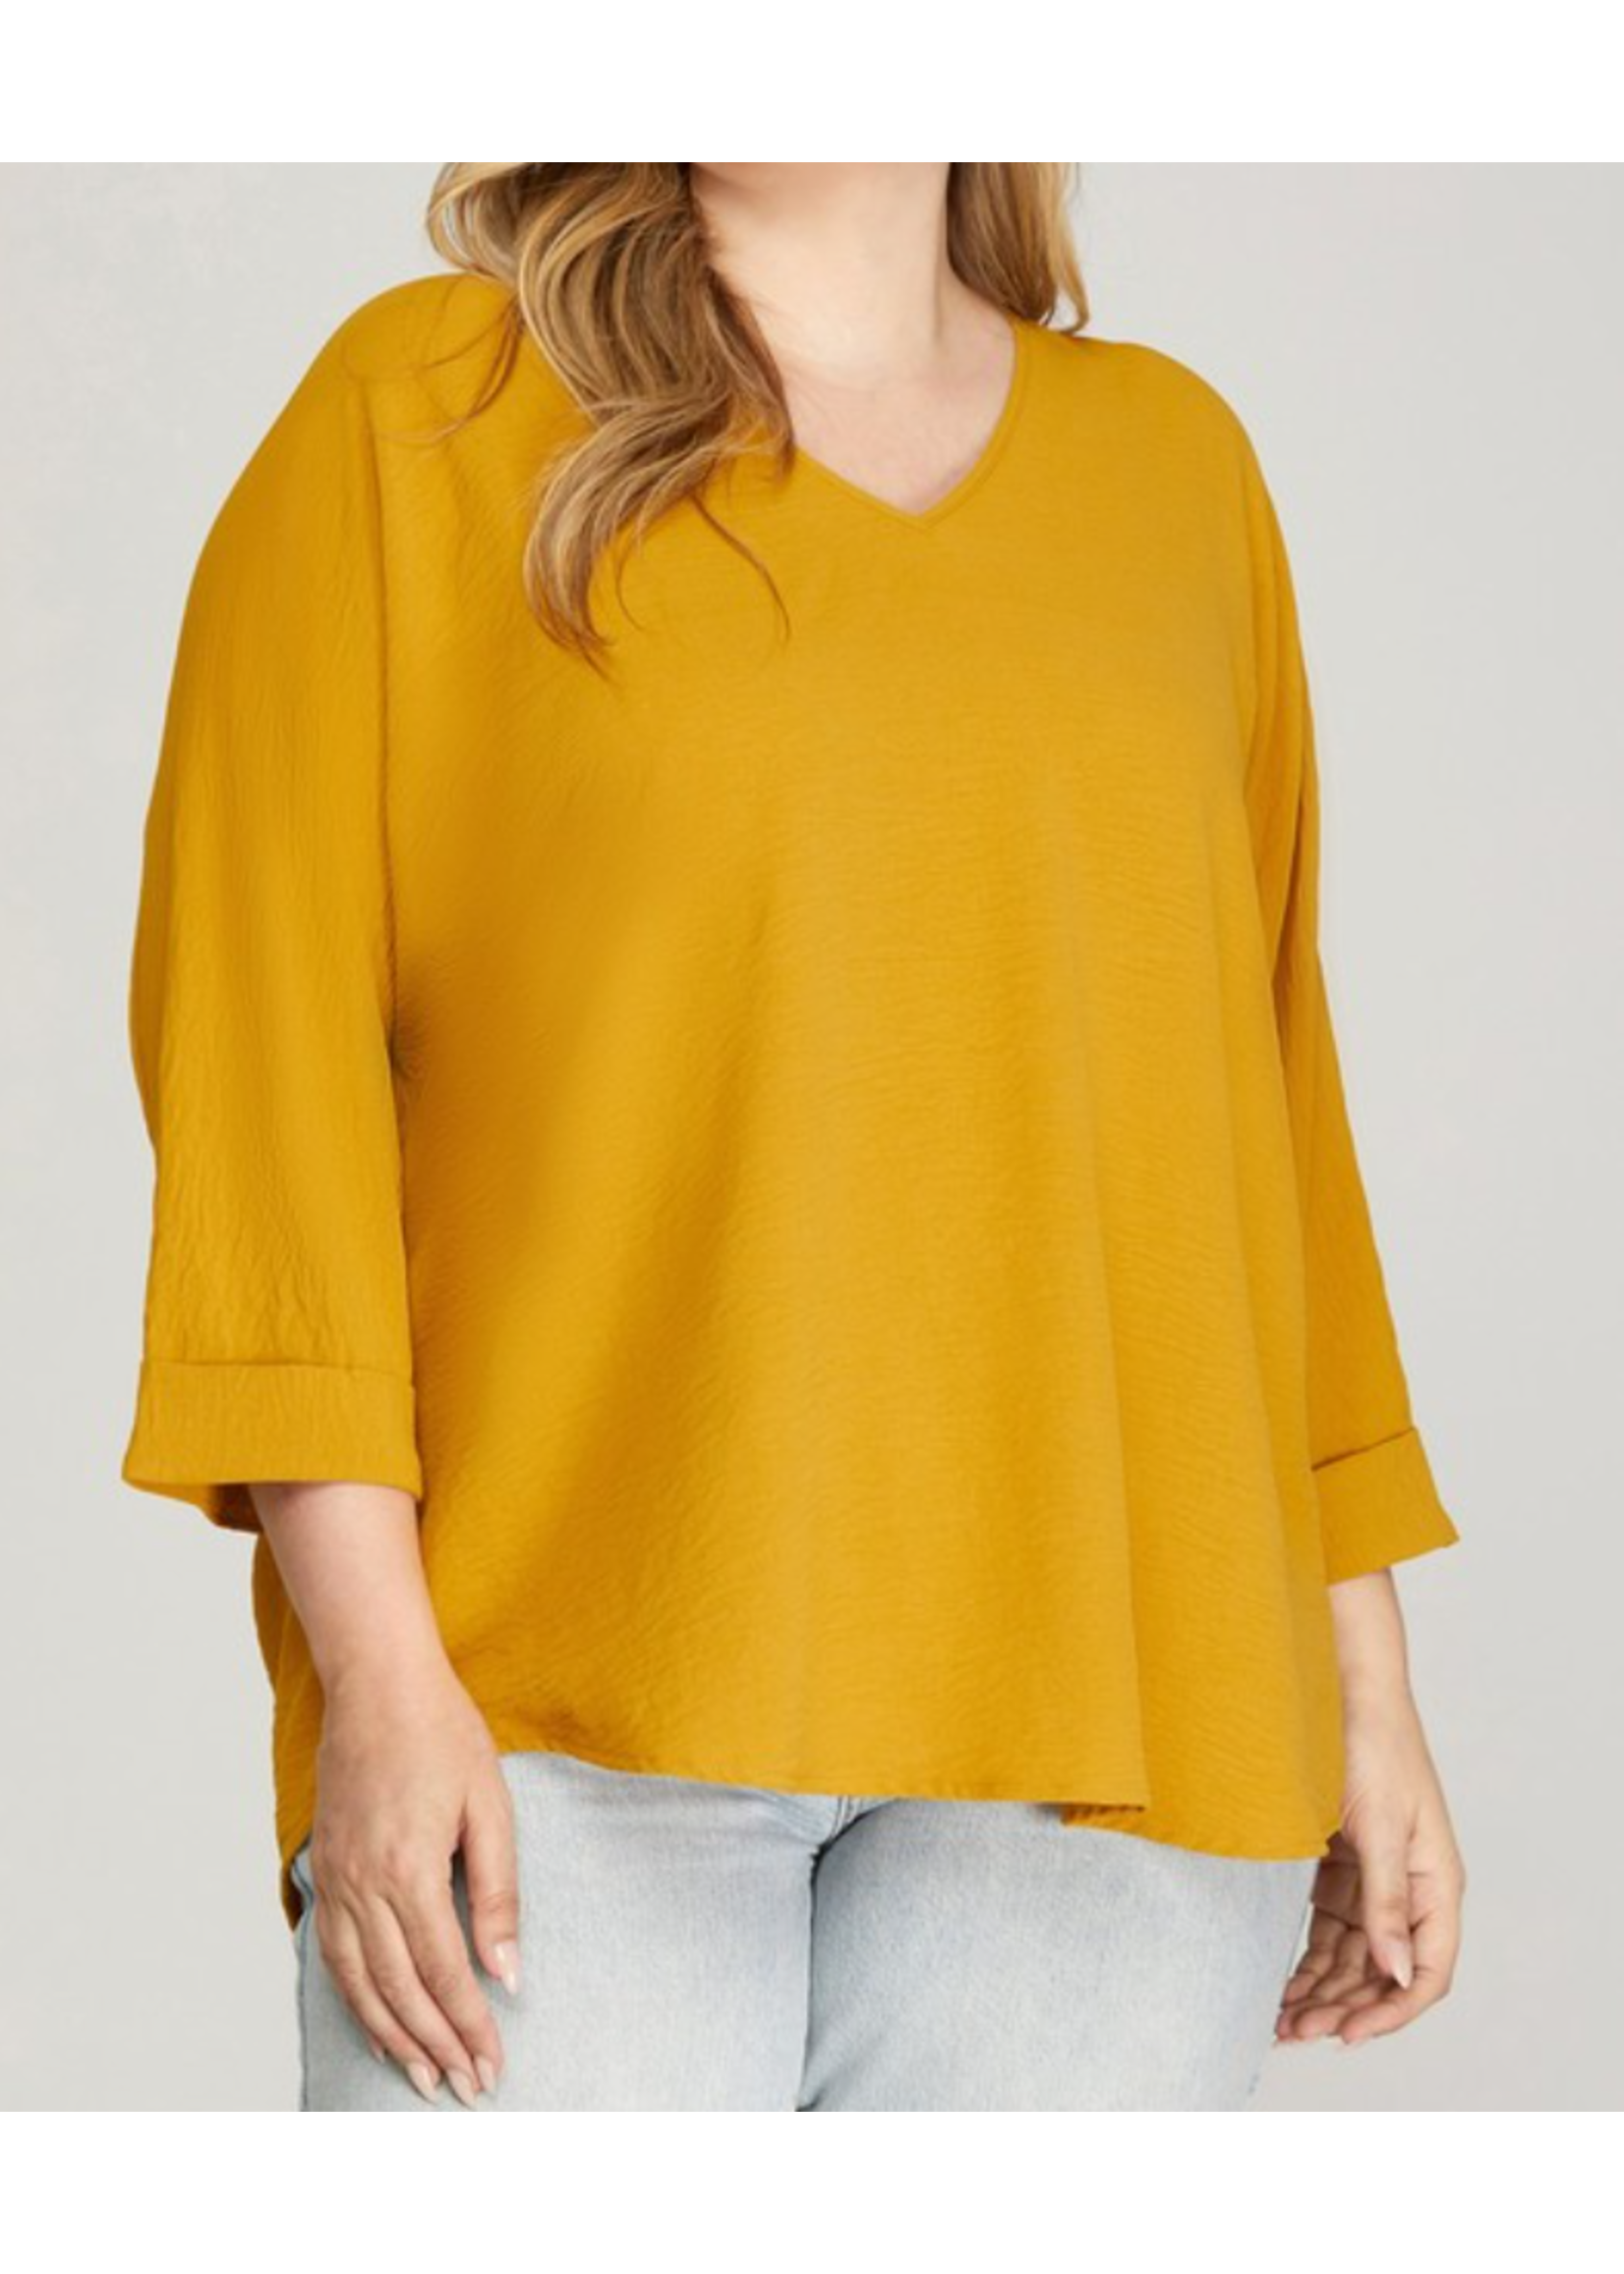 SSPSY2616 - PLUS 3/4 SLEEVE VNECK WOVEN BLOUSE